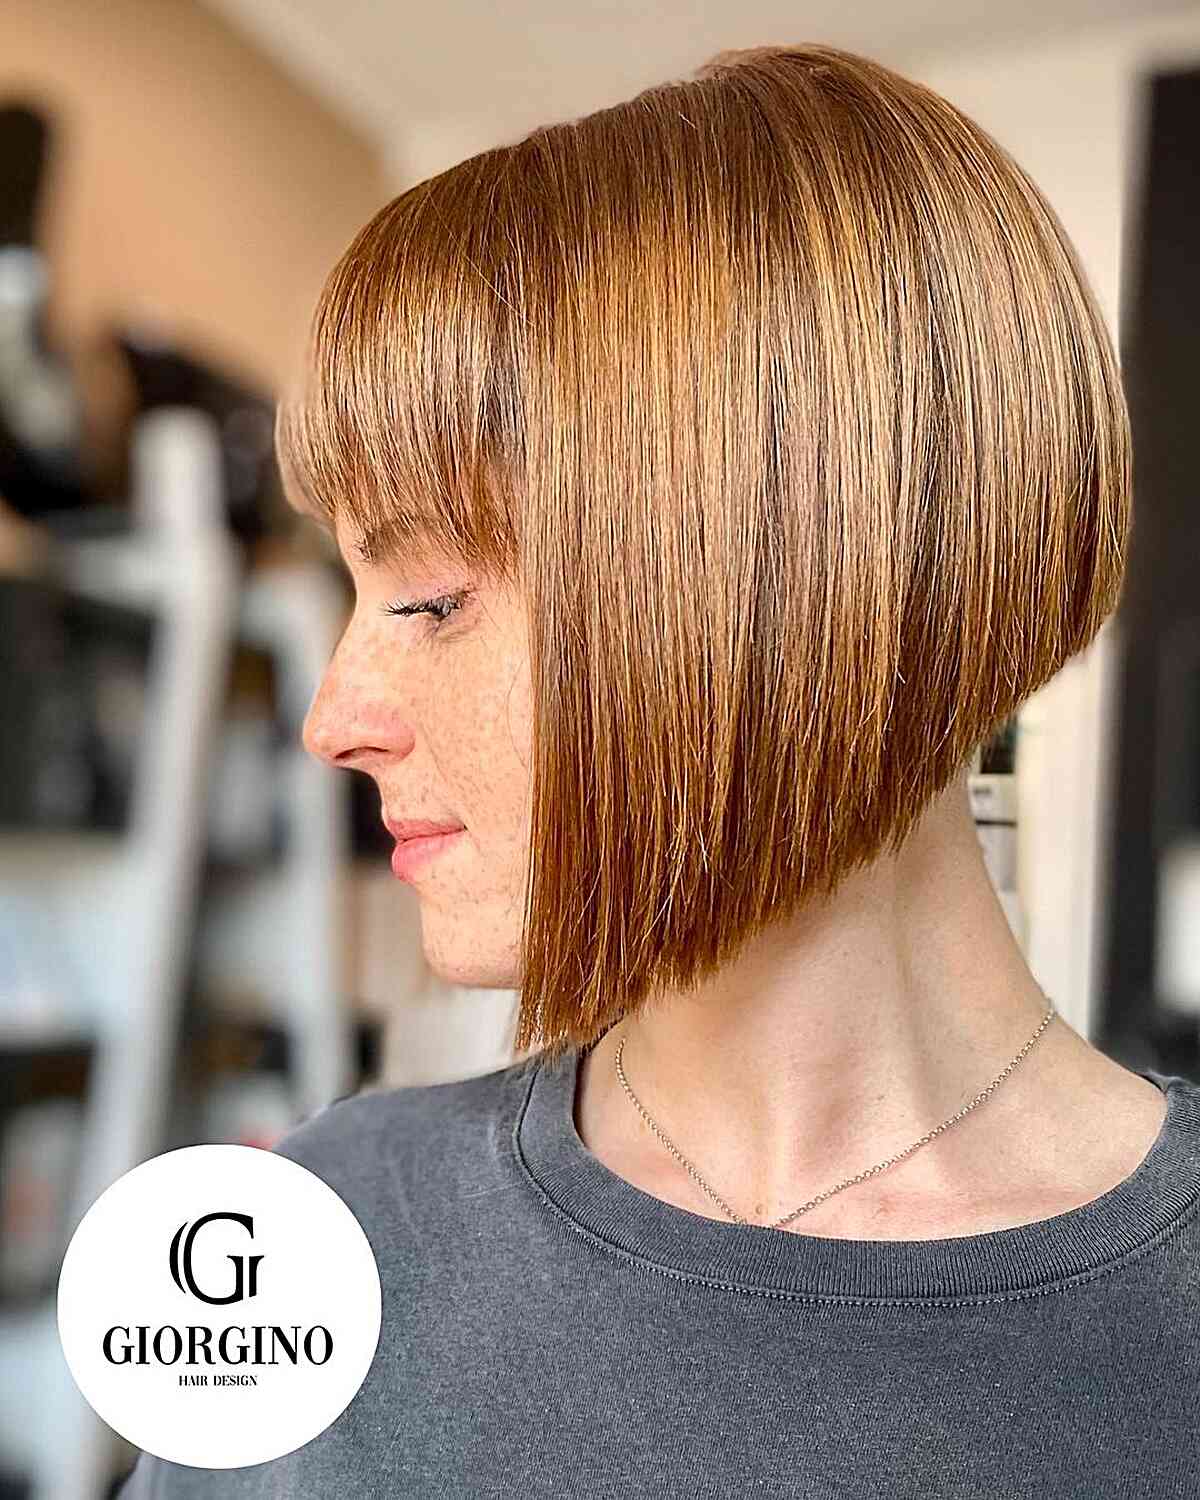 A-Line Bob Cut with Bangs and a Shaved Nape for women with light colored hair